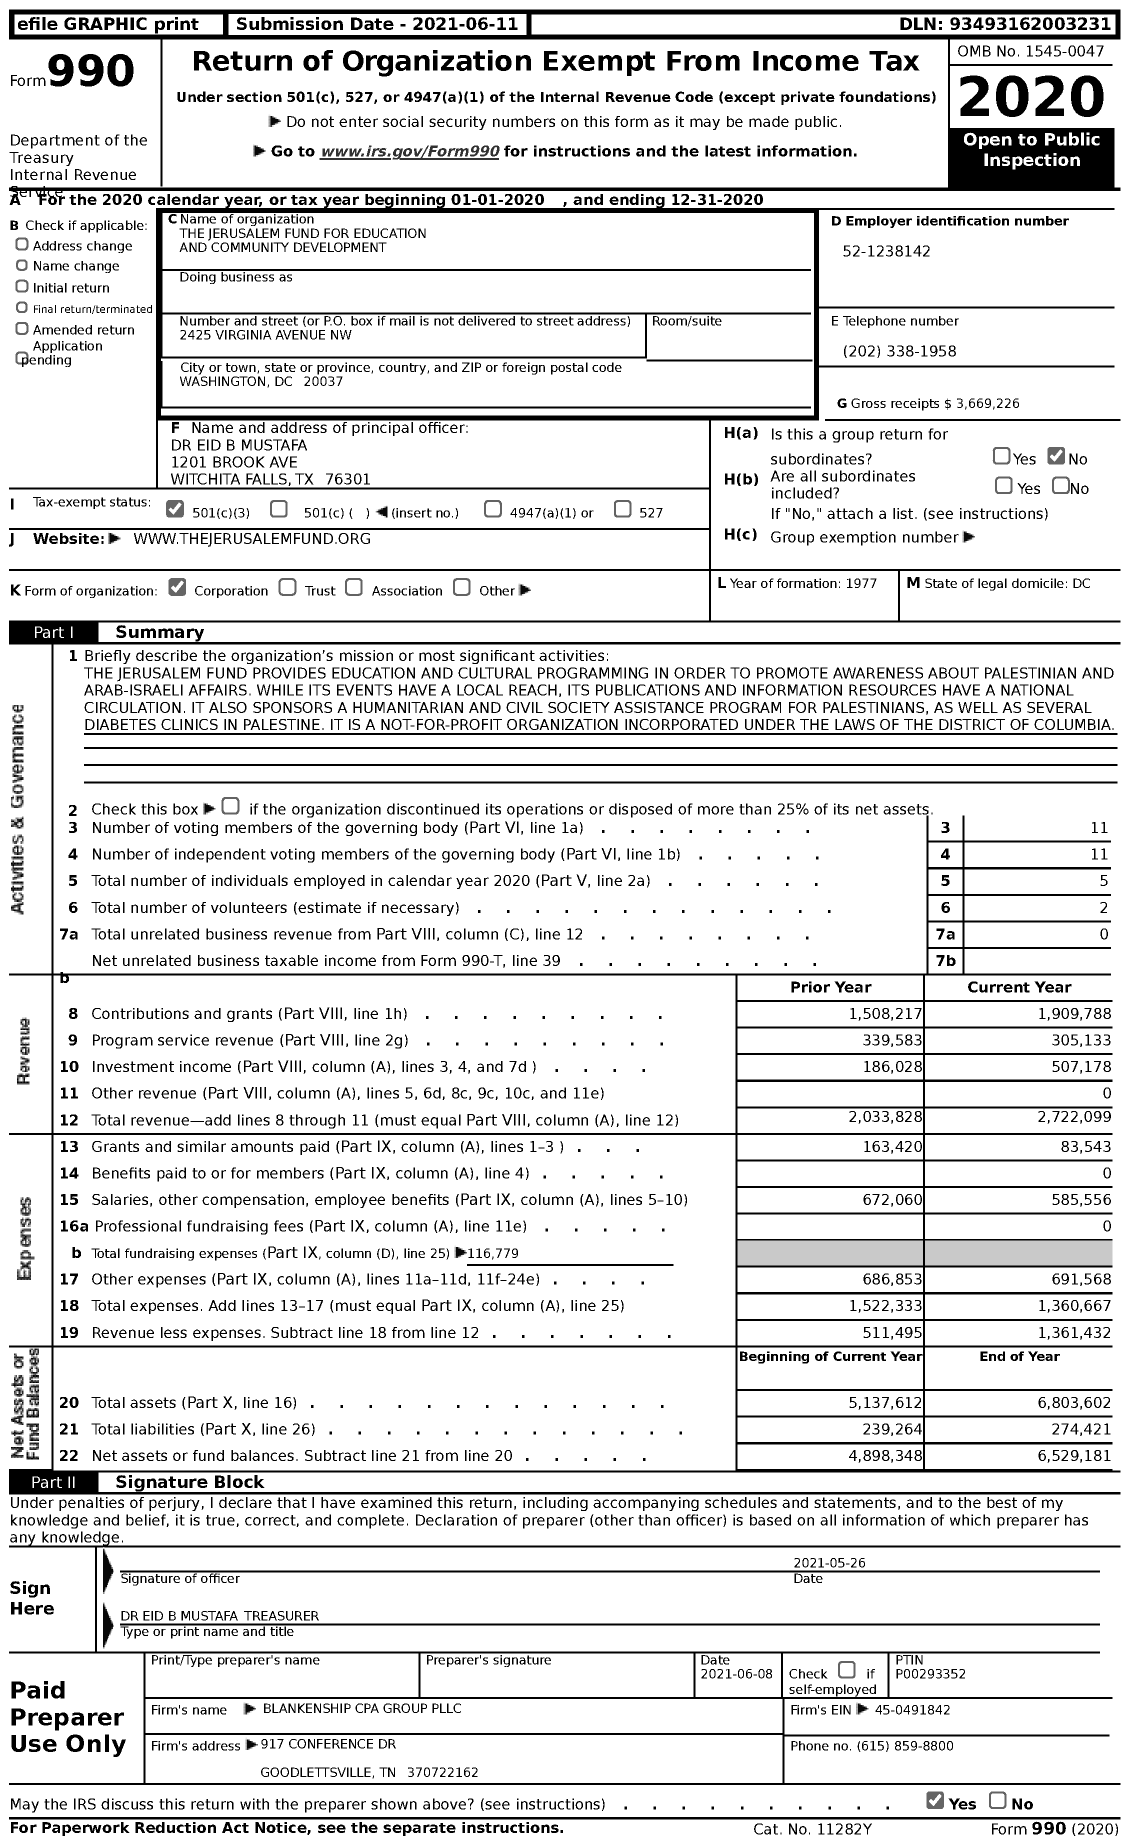 Image of first page of 2020 Form 990 for The Jerusalem Fund for Education and Community Development